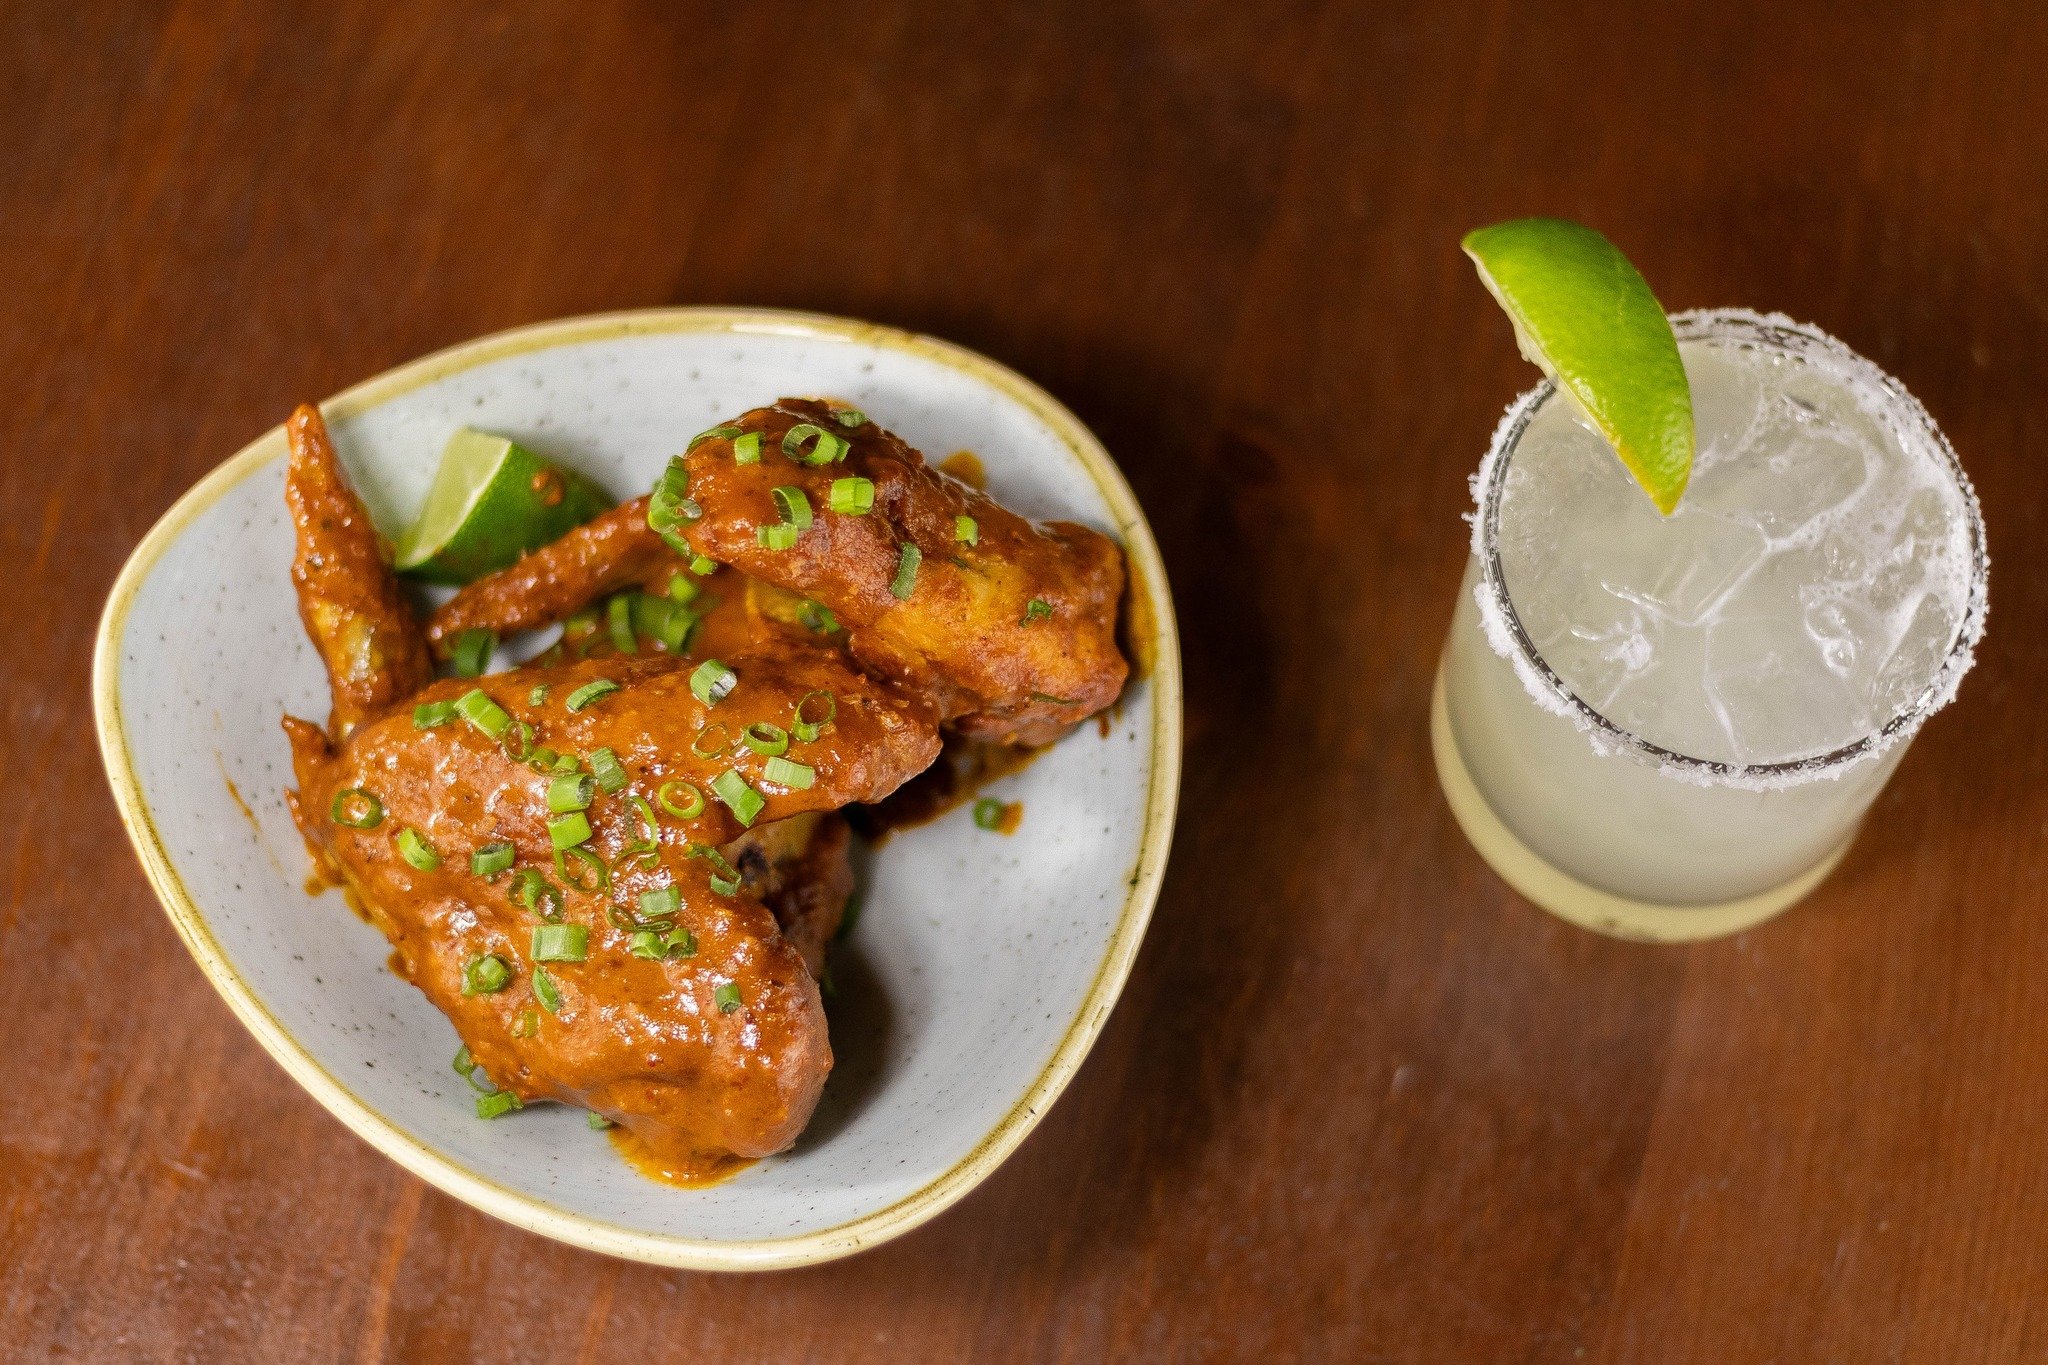 Wings + Margaritas = pure bliss. New on happy hour &ndash; our salsa macha wings are BACK. Spicy, nutty &amp; a little bit sweet... these are addictingly good. 🍗

🙂 Edina: M-F 3-6 PM
🙂 St. Paul: M-T 4-6 PM, W-F 3-6 PM

If you miss happy hour don't